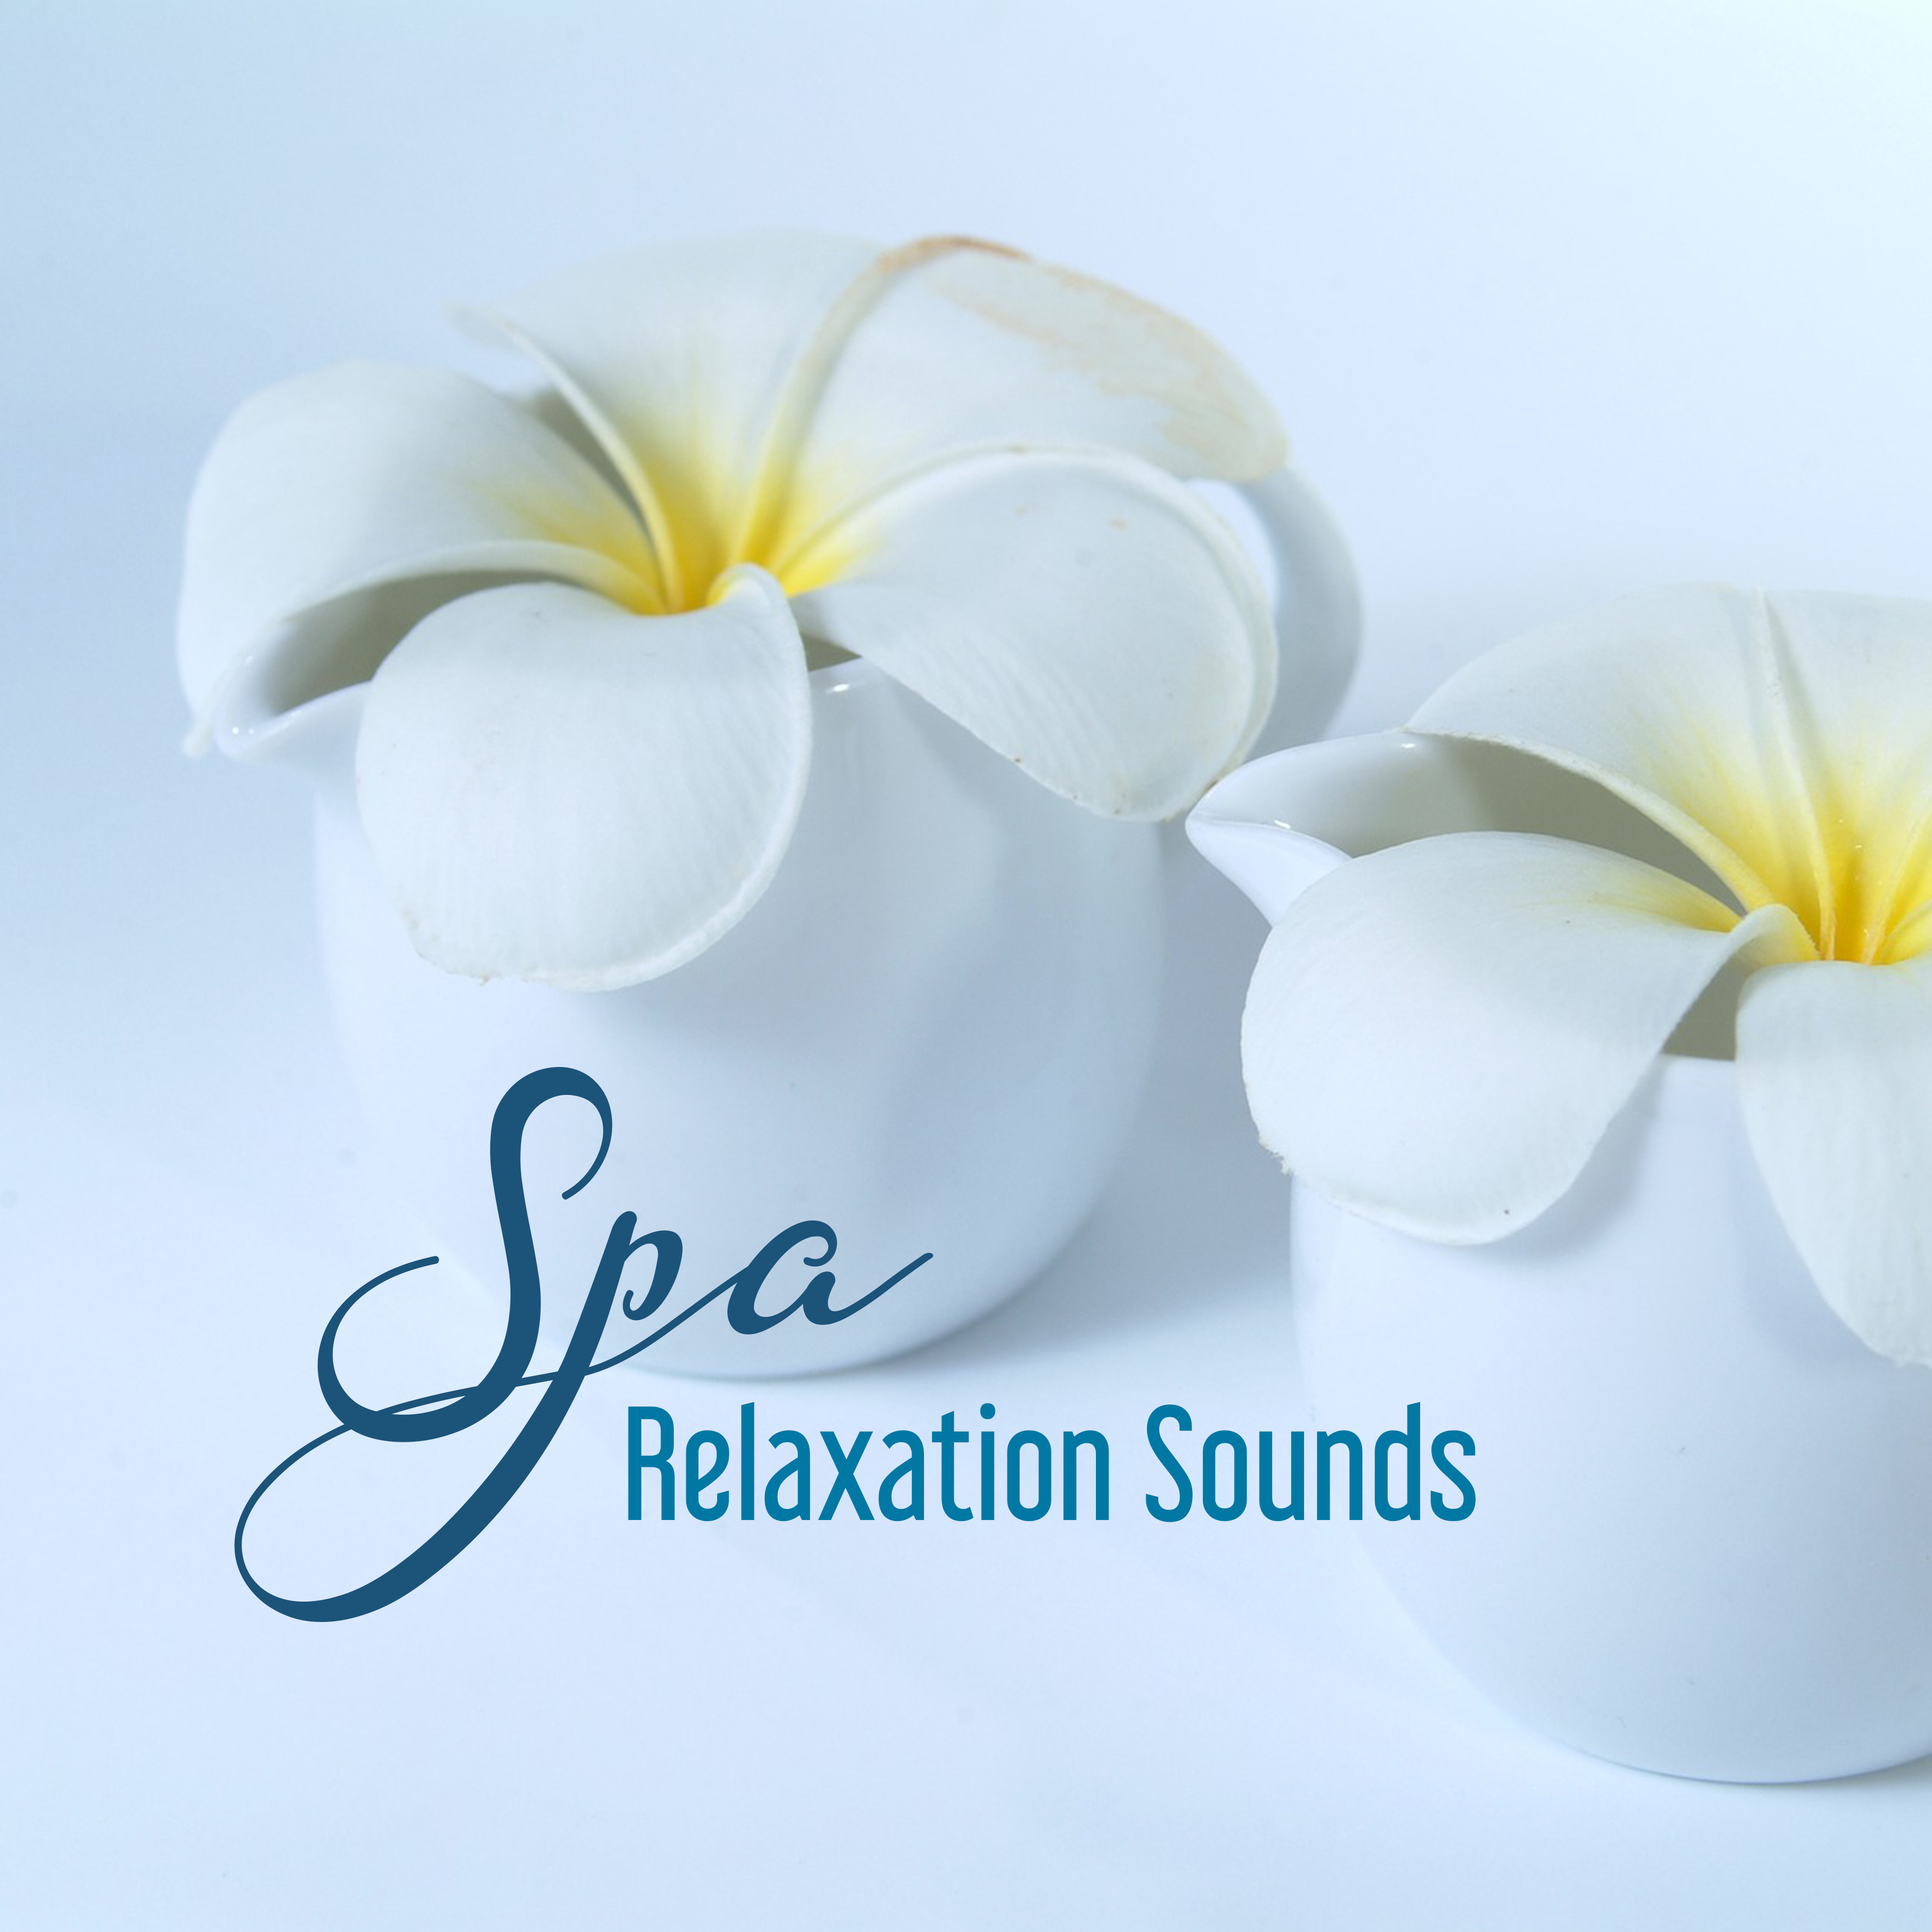 Spa Relaxation Sounds – Beautiful Memories, Soothing Sounds, Music to Rest & Relax